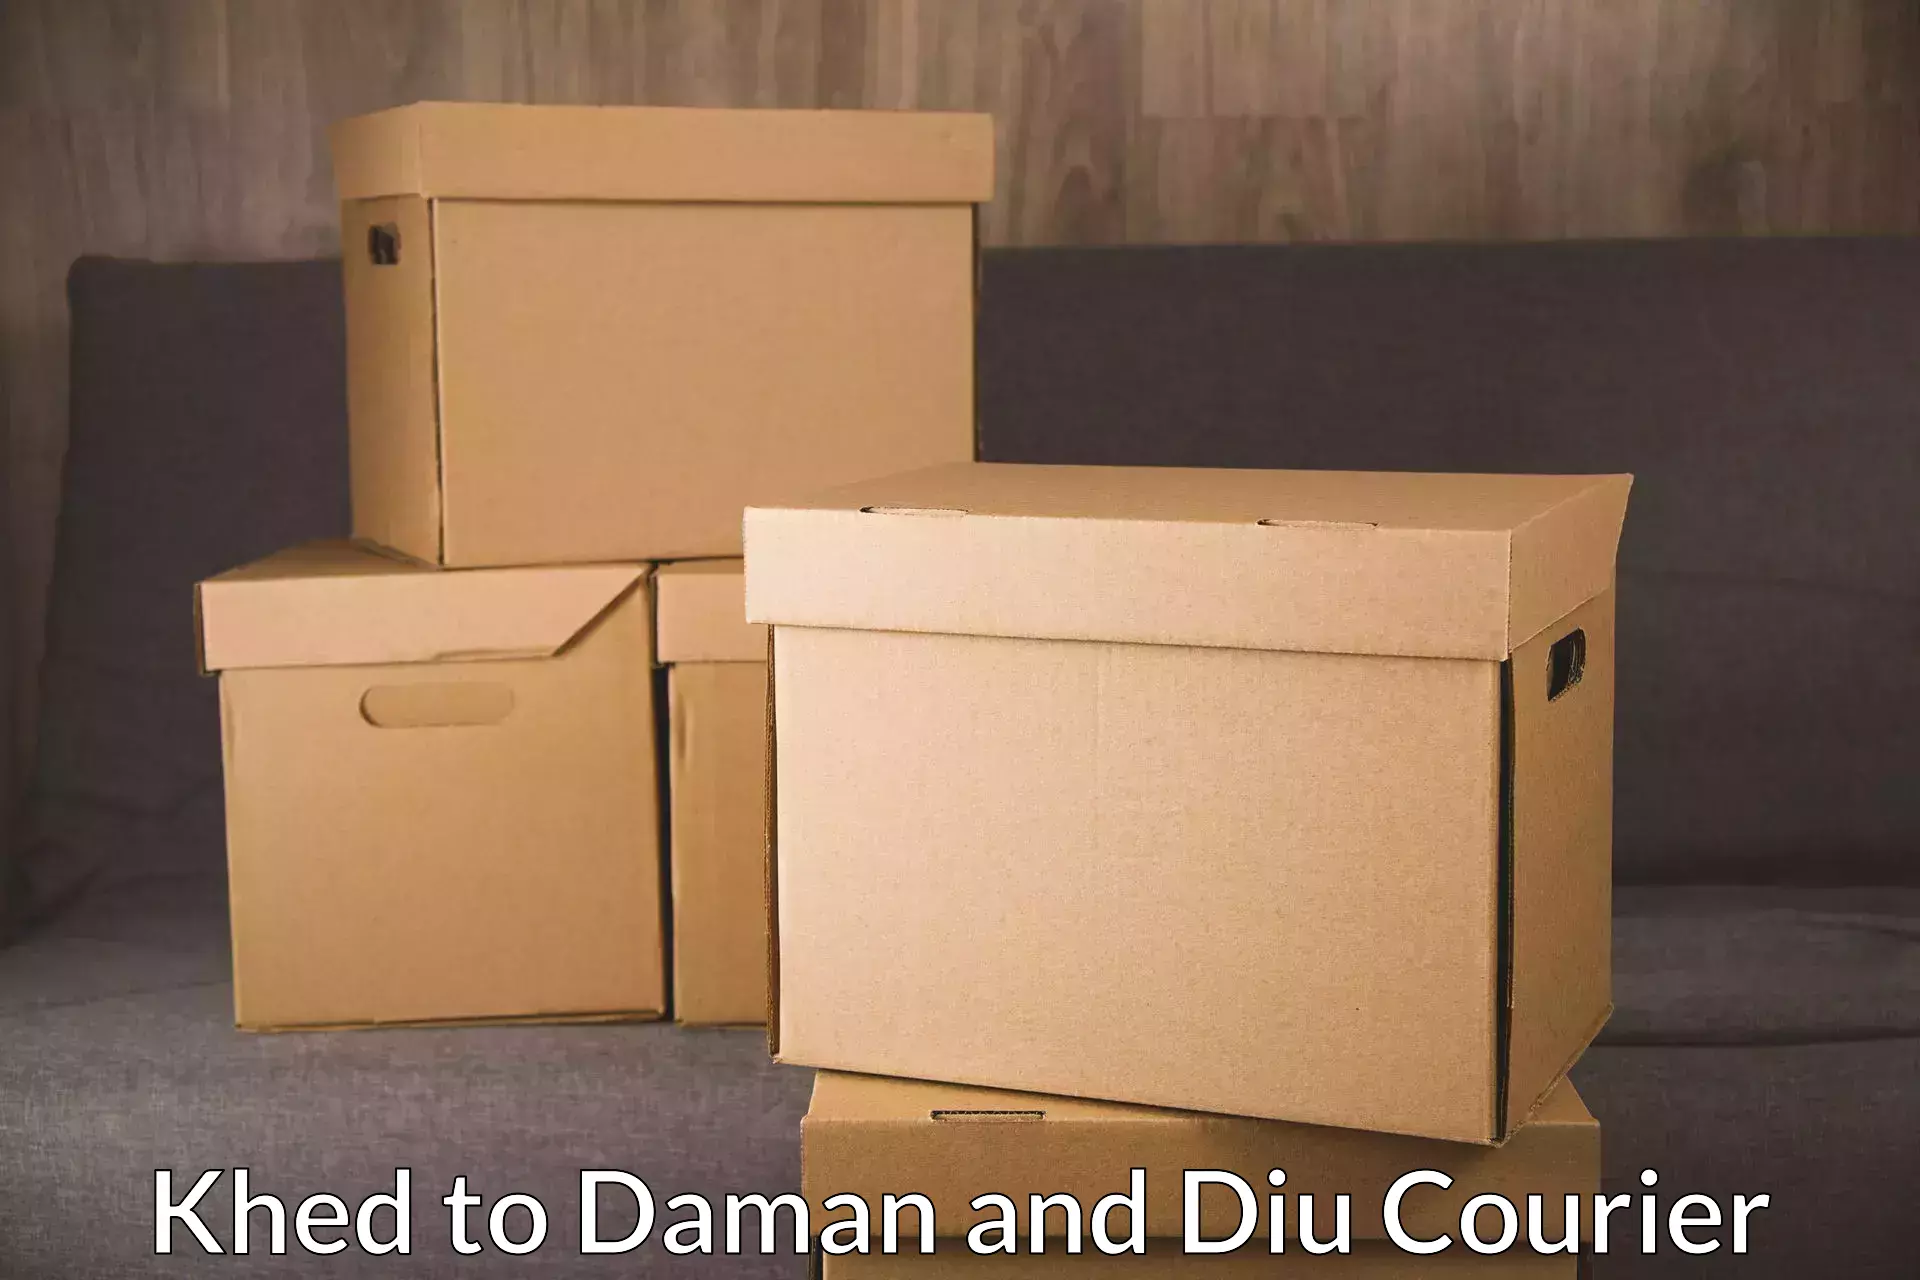 Express package handling Khed to Daman